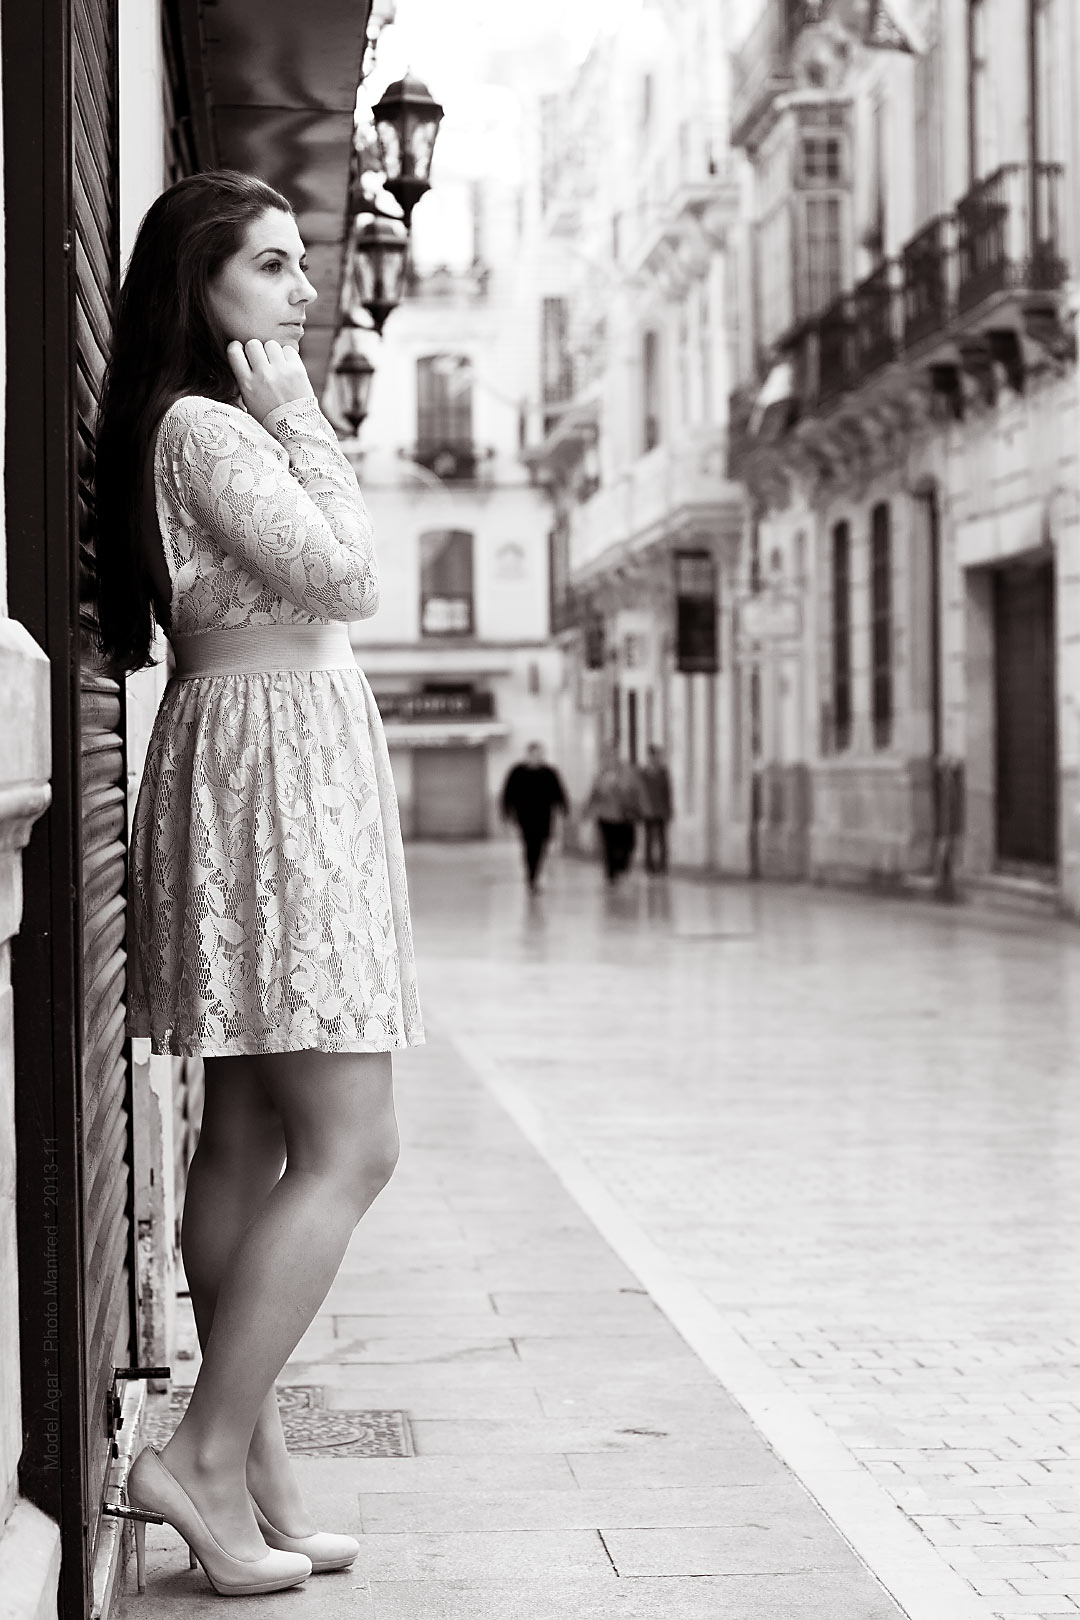 A young woman wearing a skirt is standing in a street in the centre of Málaga.